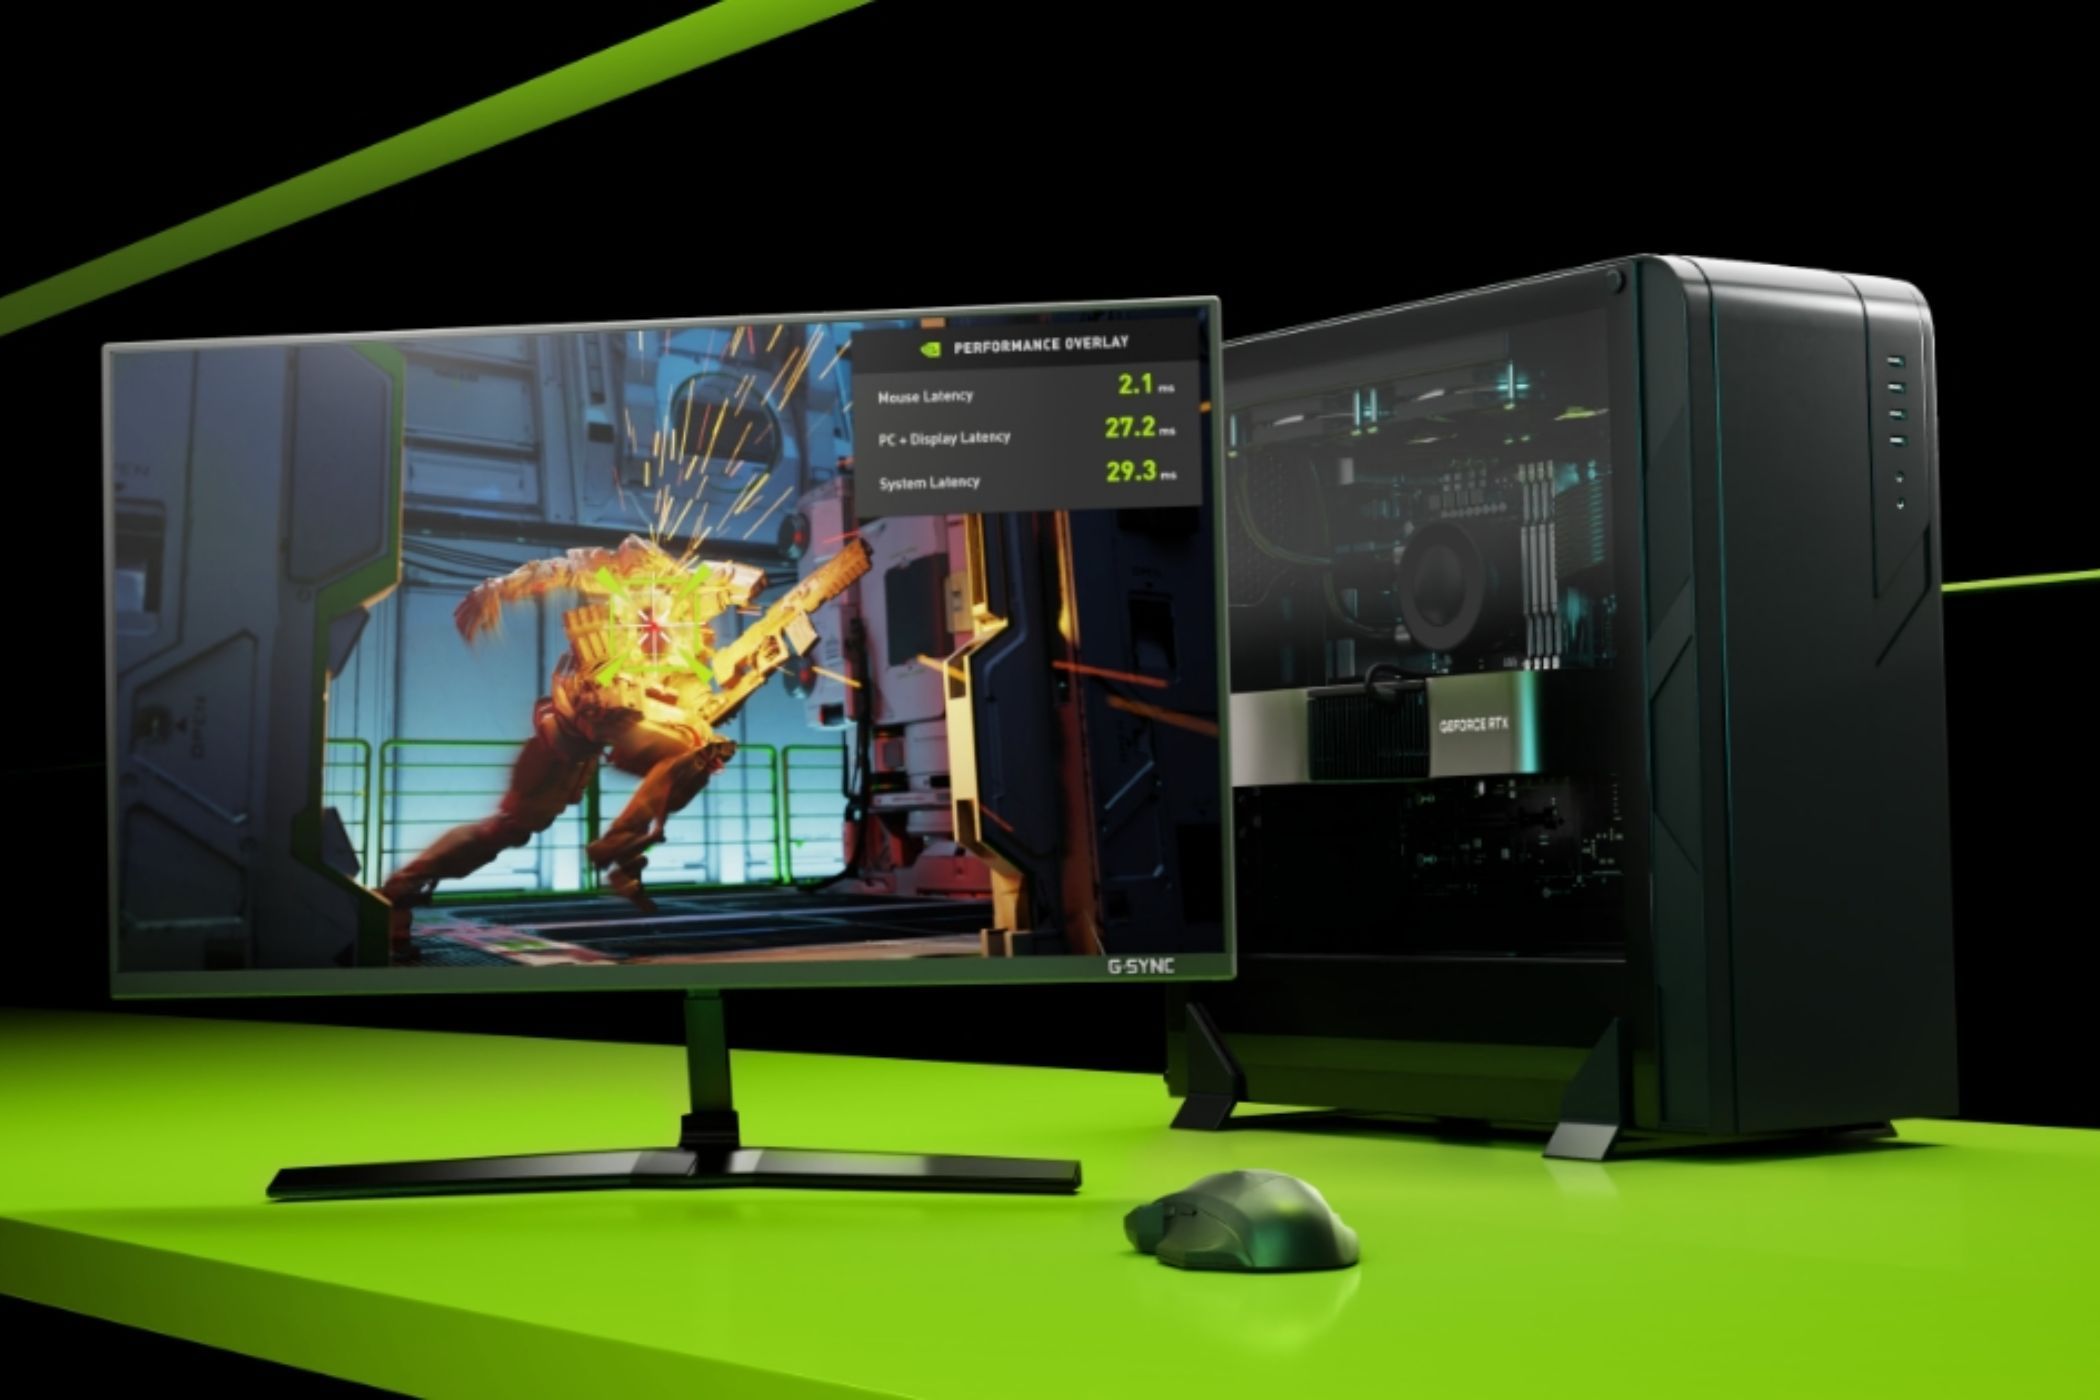 An image showing a PC with Nvidia GPU next to a monitor showing a game and latency stats.